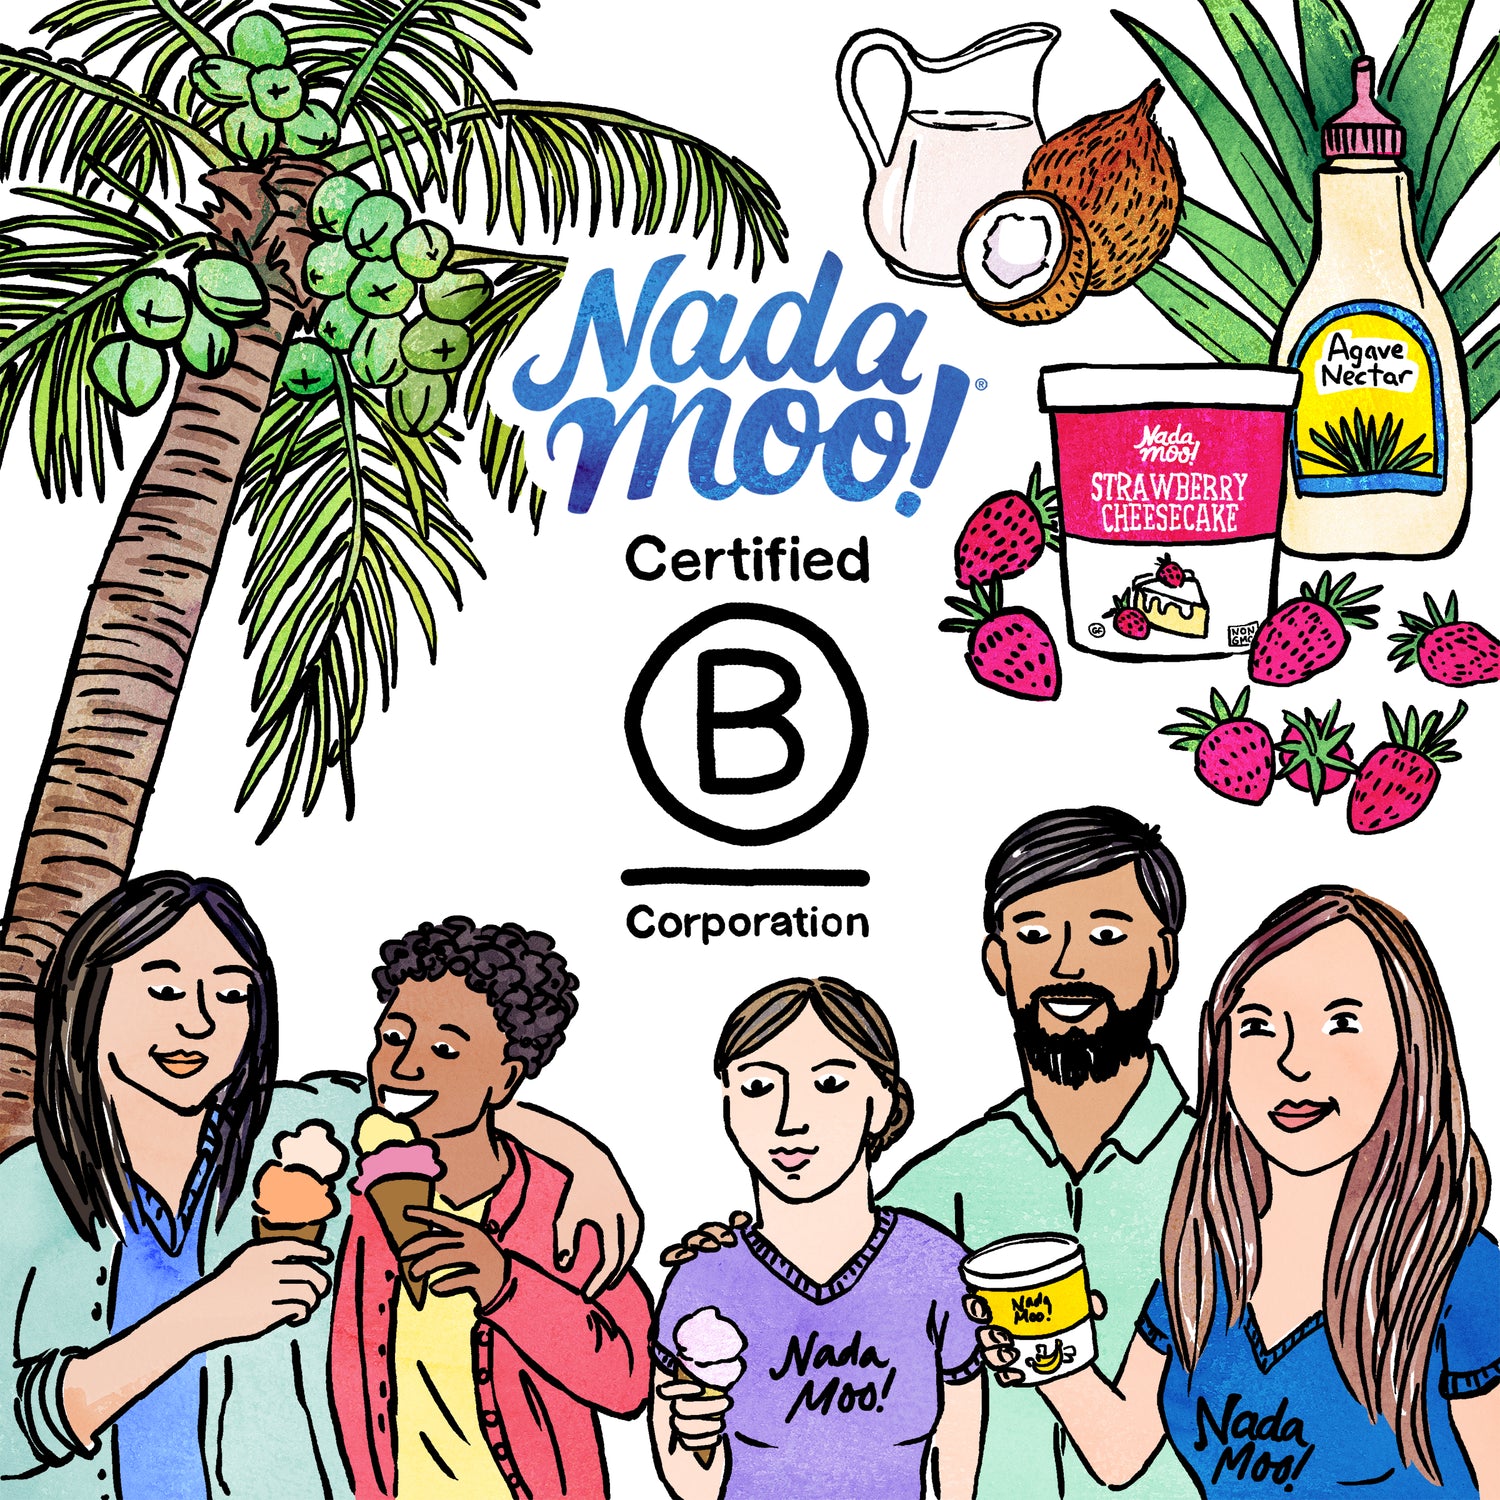 centrally stacked NadaMoo! and Certified B Corporation logos surrounded by a coconut tree in the left corner, 5 diverse employees sharing ice cream along the bottom, top right: coconut milk pitcher, Strawberry Cheesecake frozen dessert, agave syrup bottle